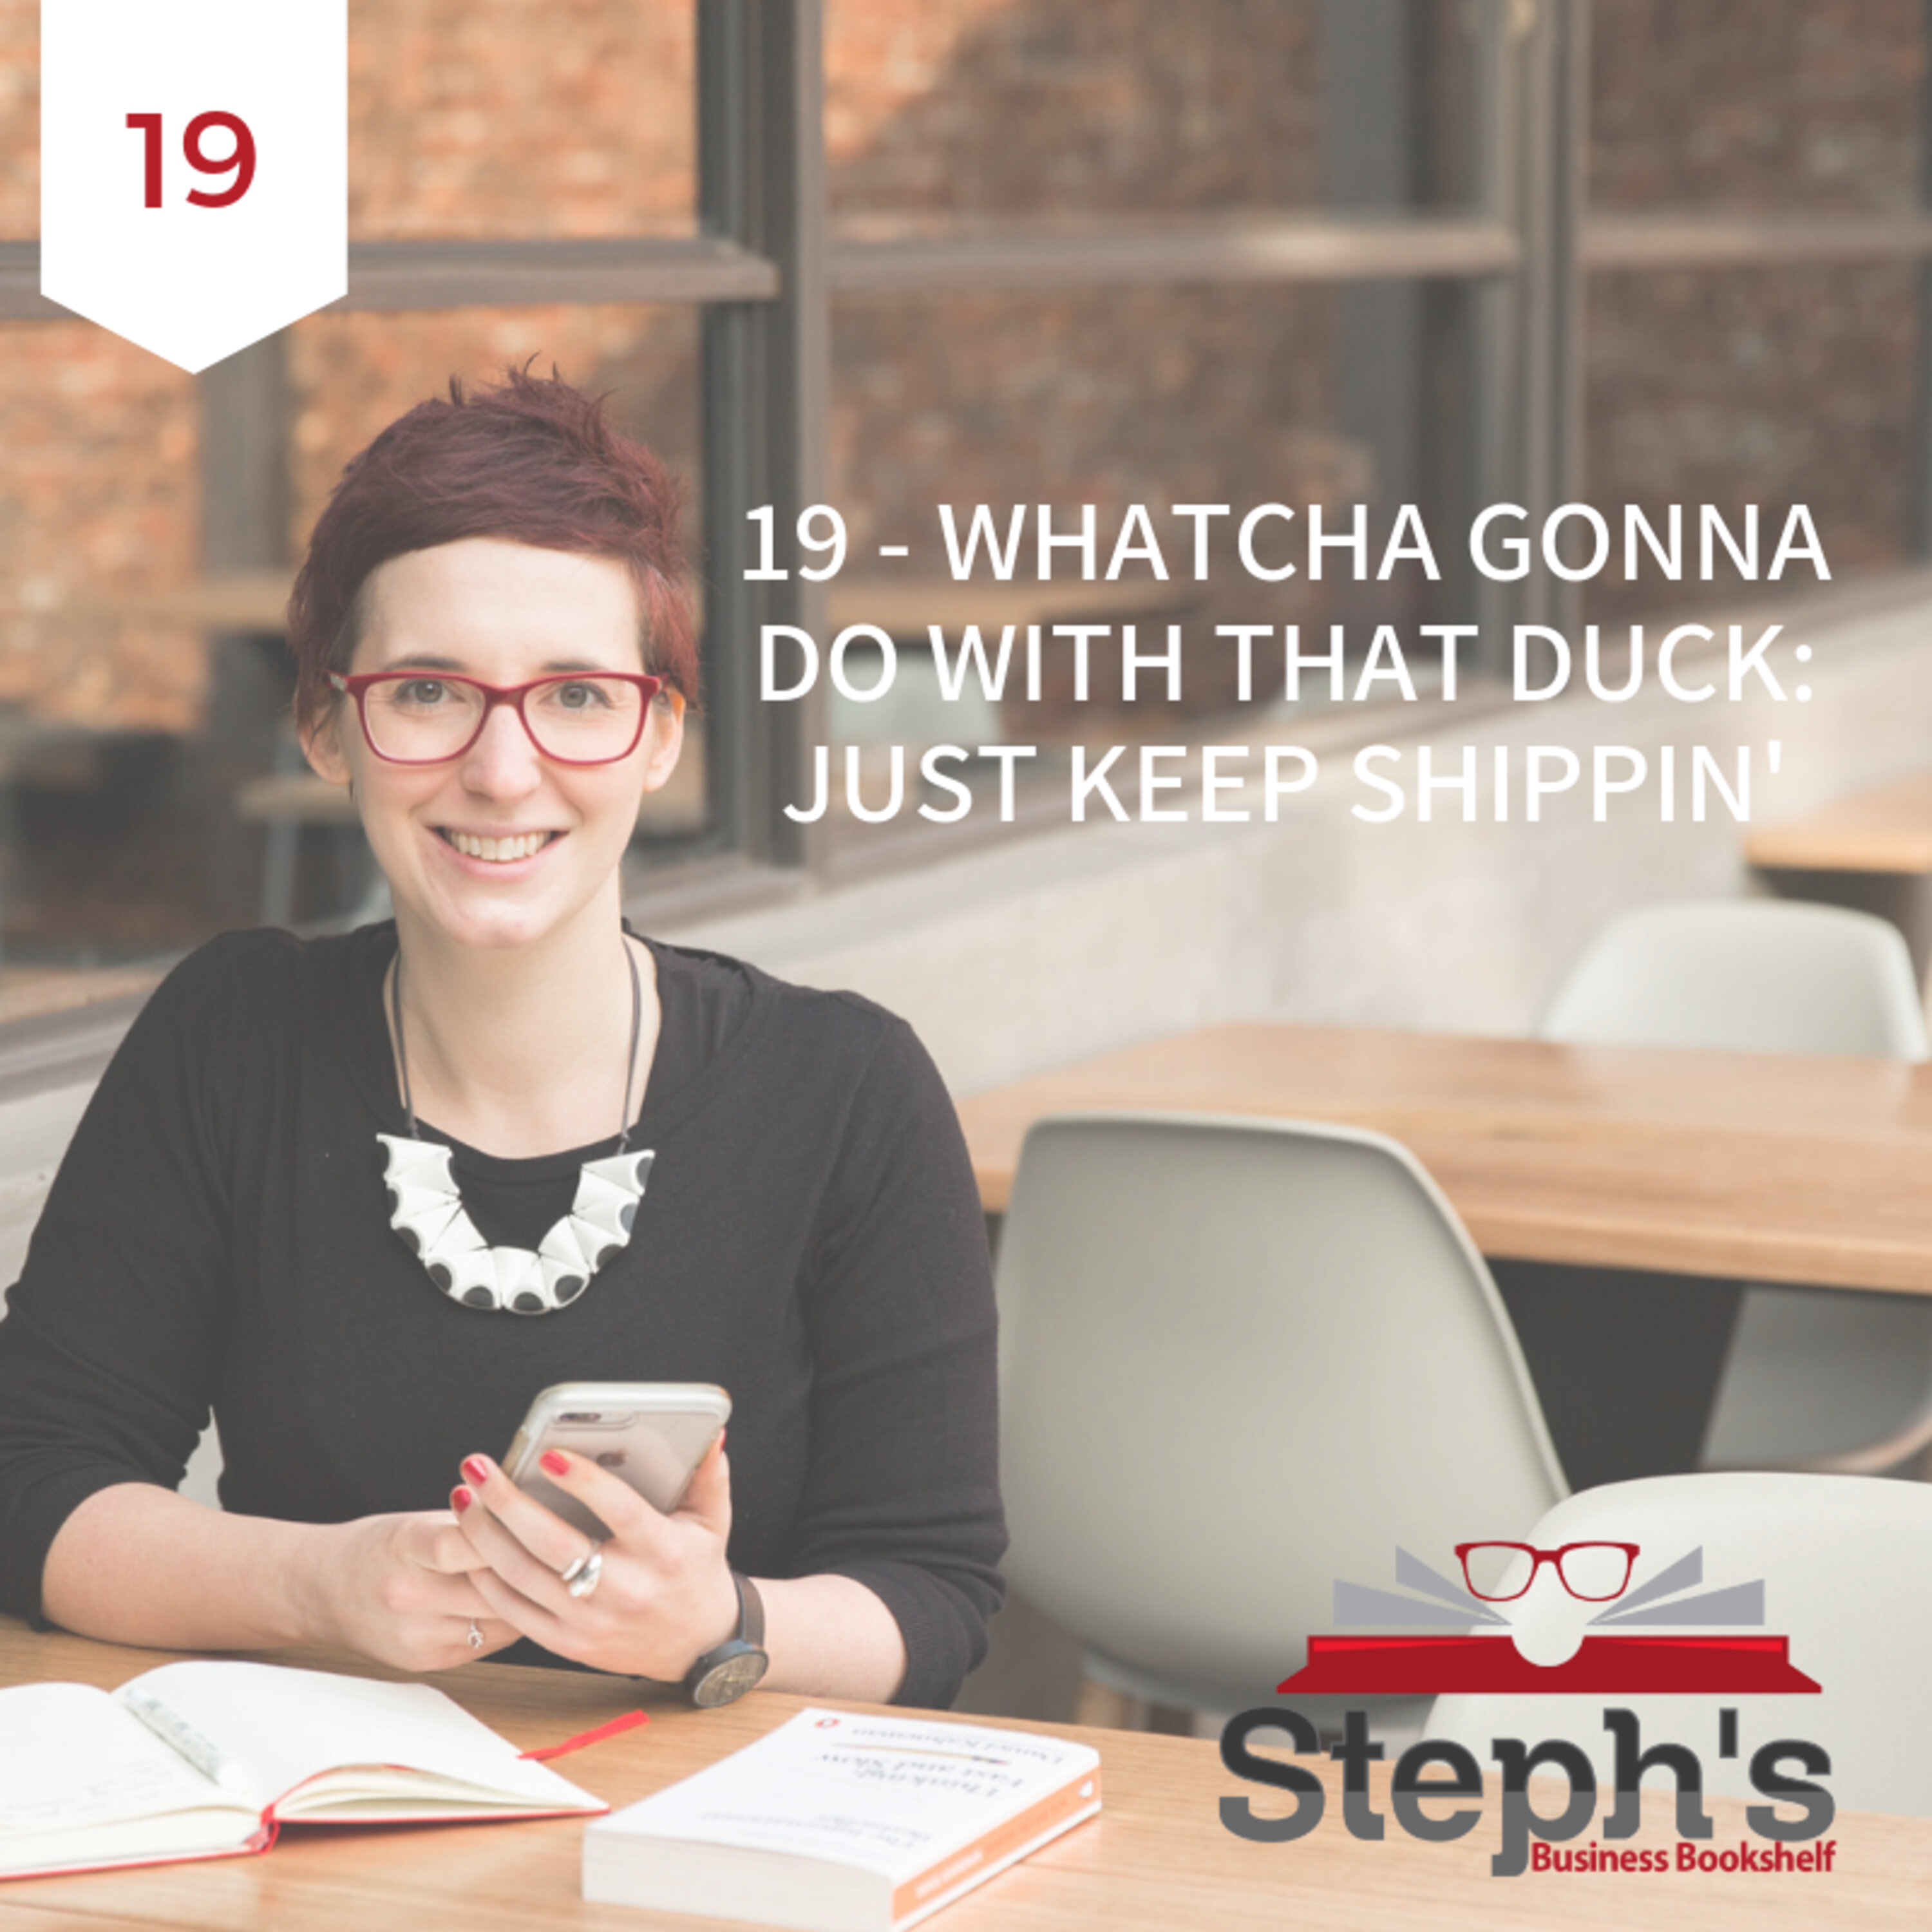 Whatcha Gonna Do With That Duck by Seth Godin: Just keep shippin’ Image